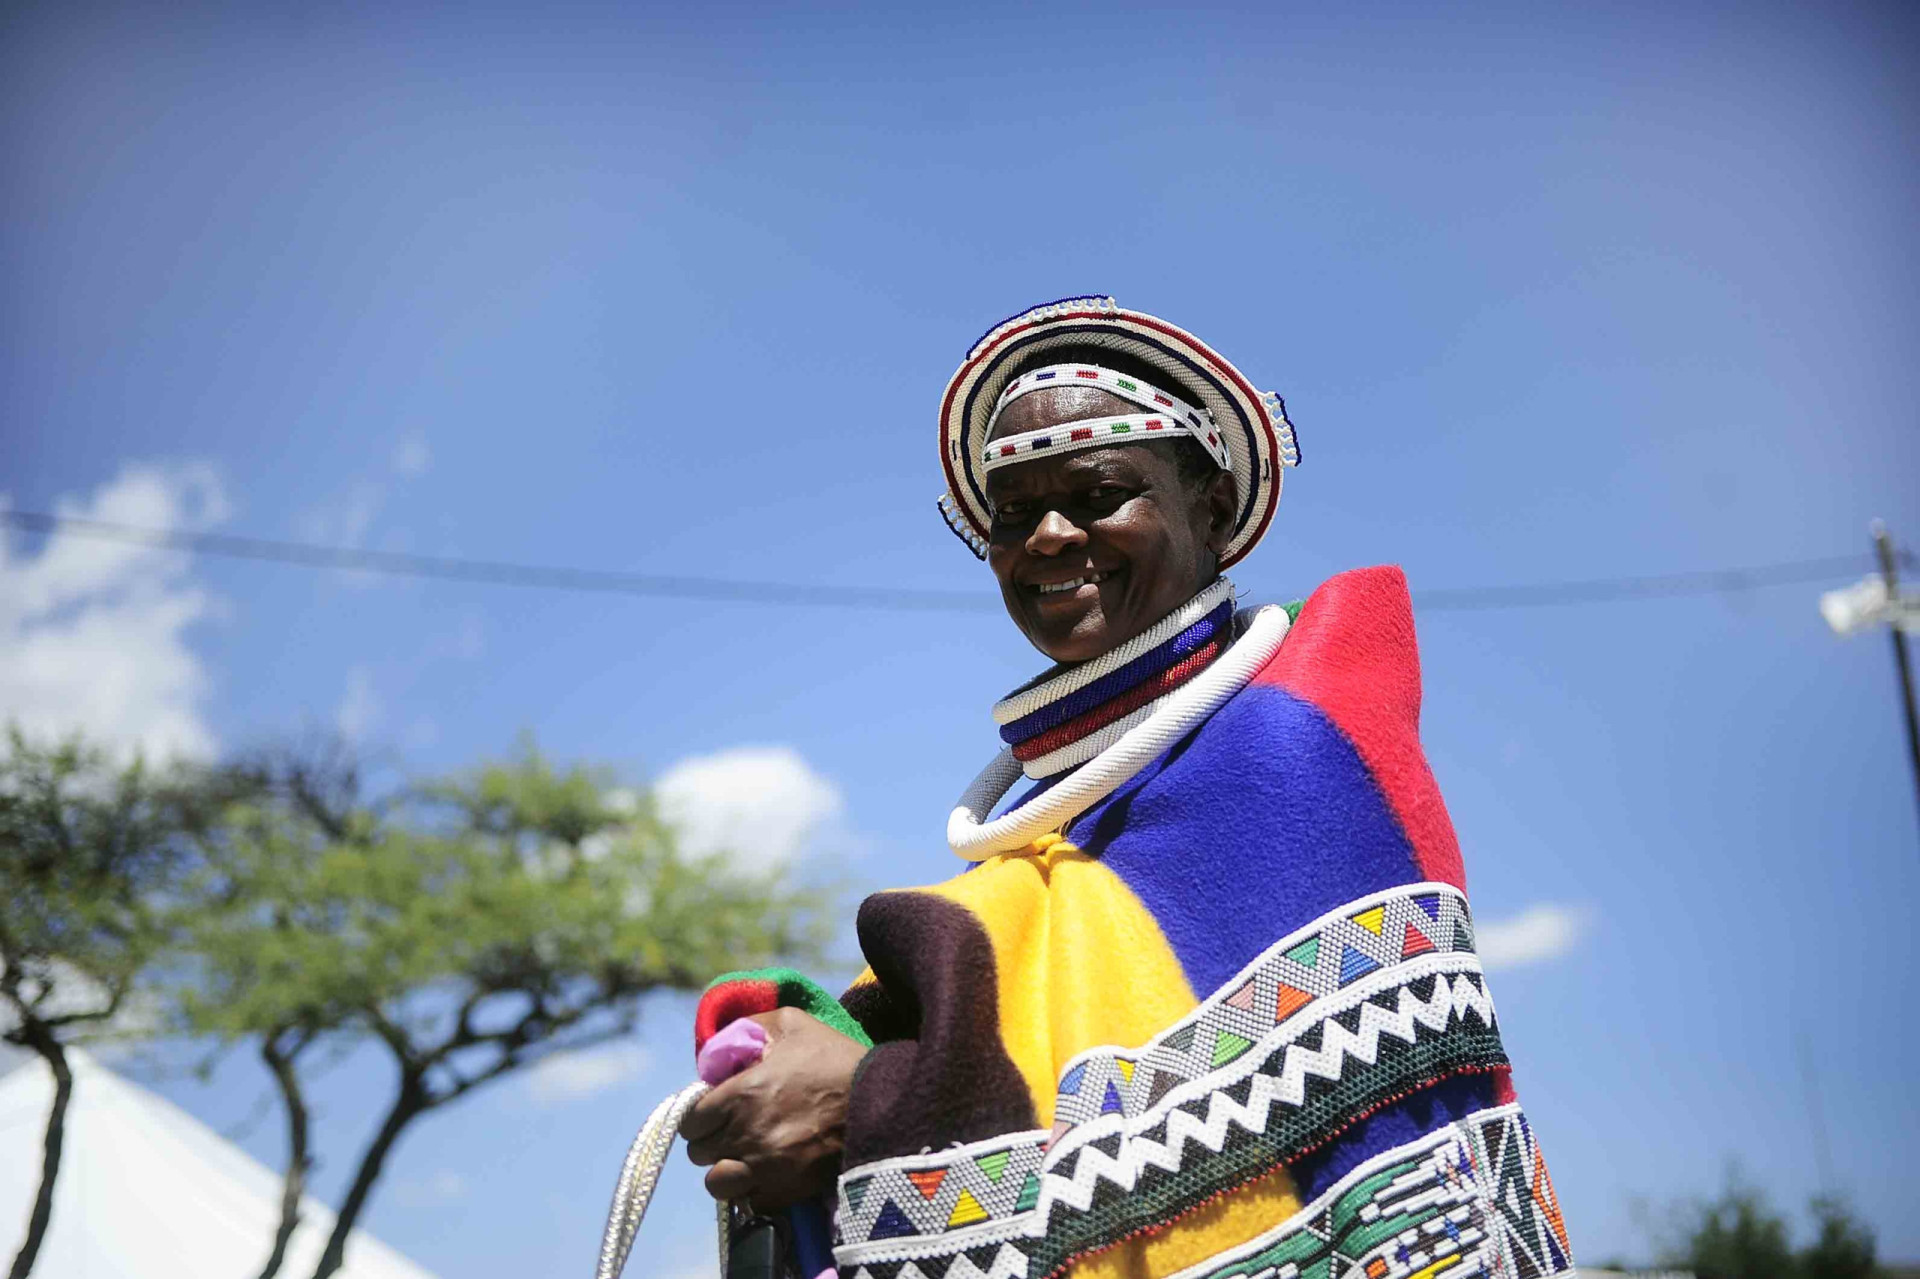 <p>Ndebele society traditionally followed a hierarchical structure, with the king (<em>intombi</em>) at the apex of power. This structure still exists in small ways today, but modern politics play a larger role.</p><p>You may also like:<a href="https://www.starsinsider.com/n/493286?utm_source=msn.com&utm_medium=display&utm_campaign=referral_description&utm_content=706691en-us"> Mythological figures similar to Jesus</a></p>